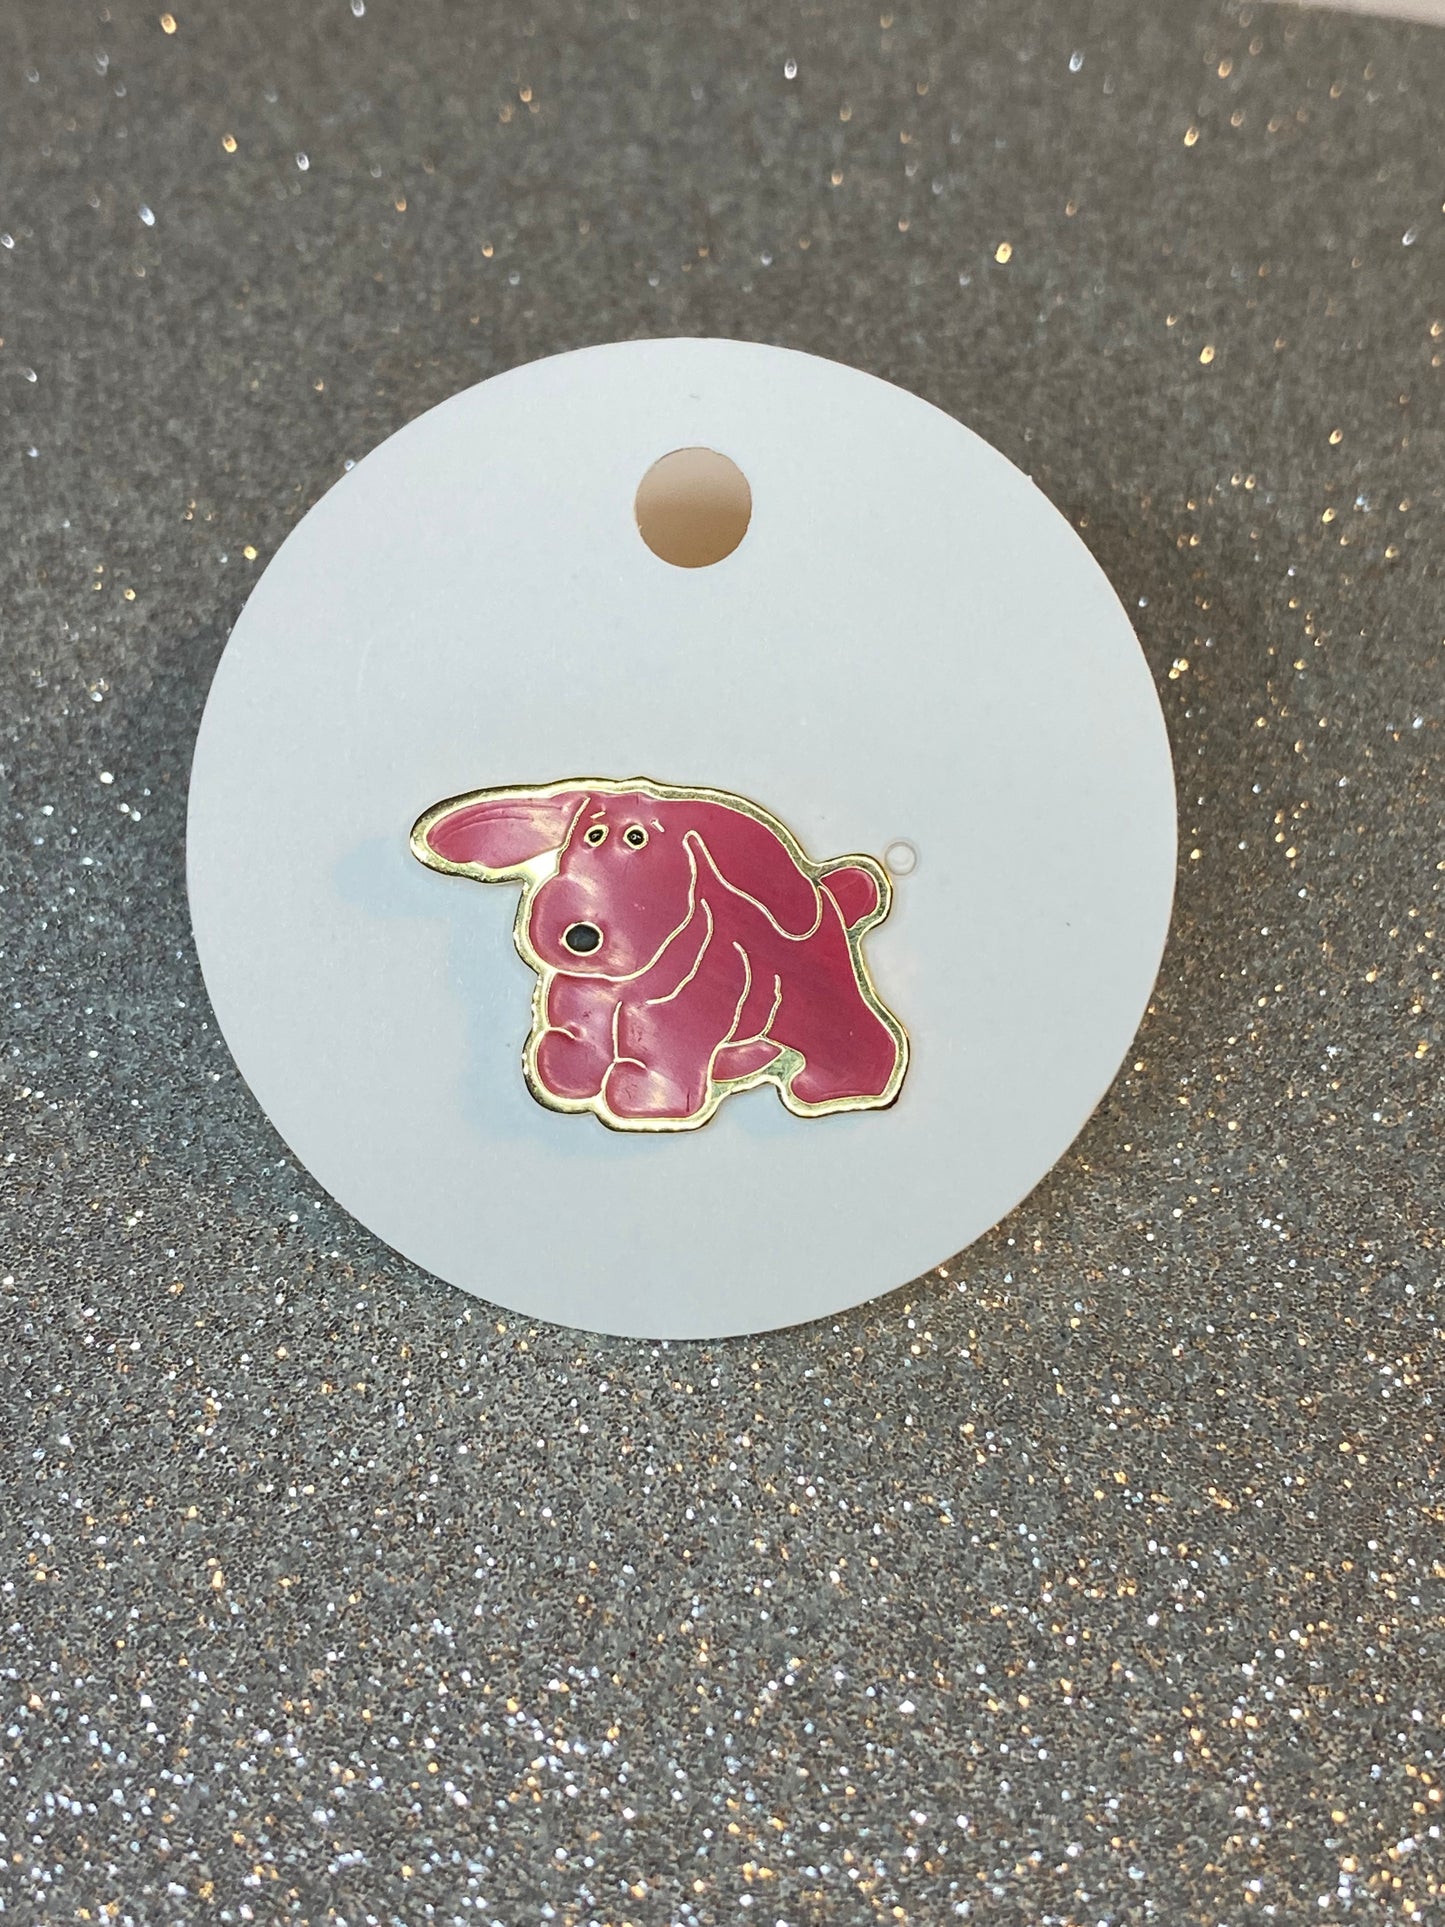 Red Puppy Dog Pin